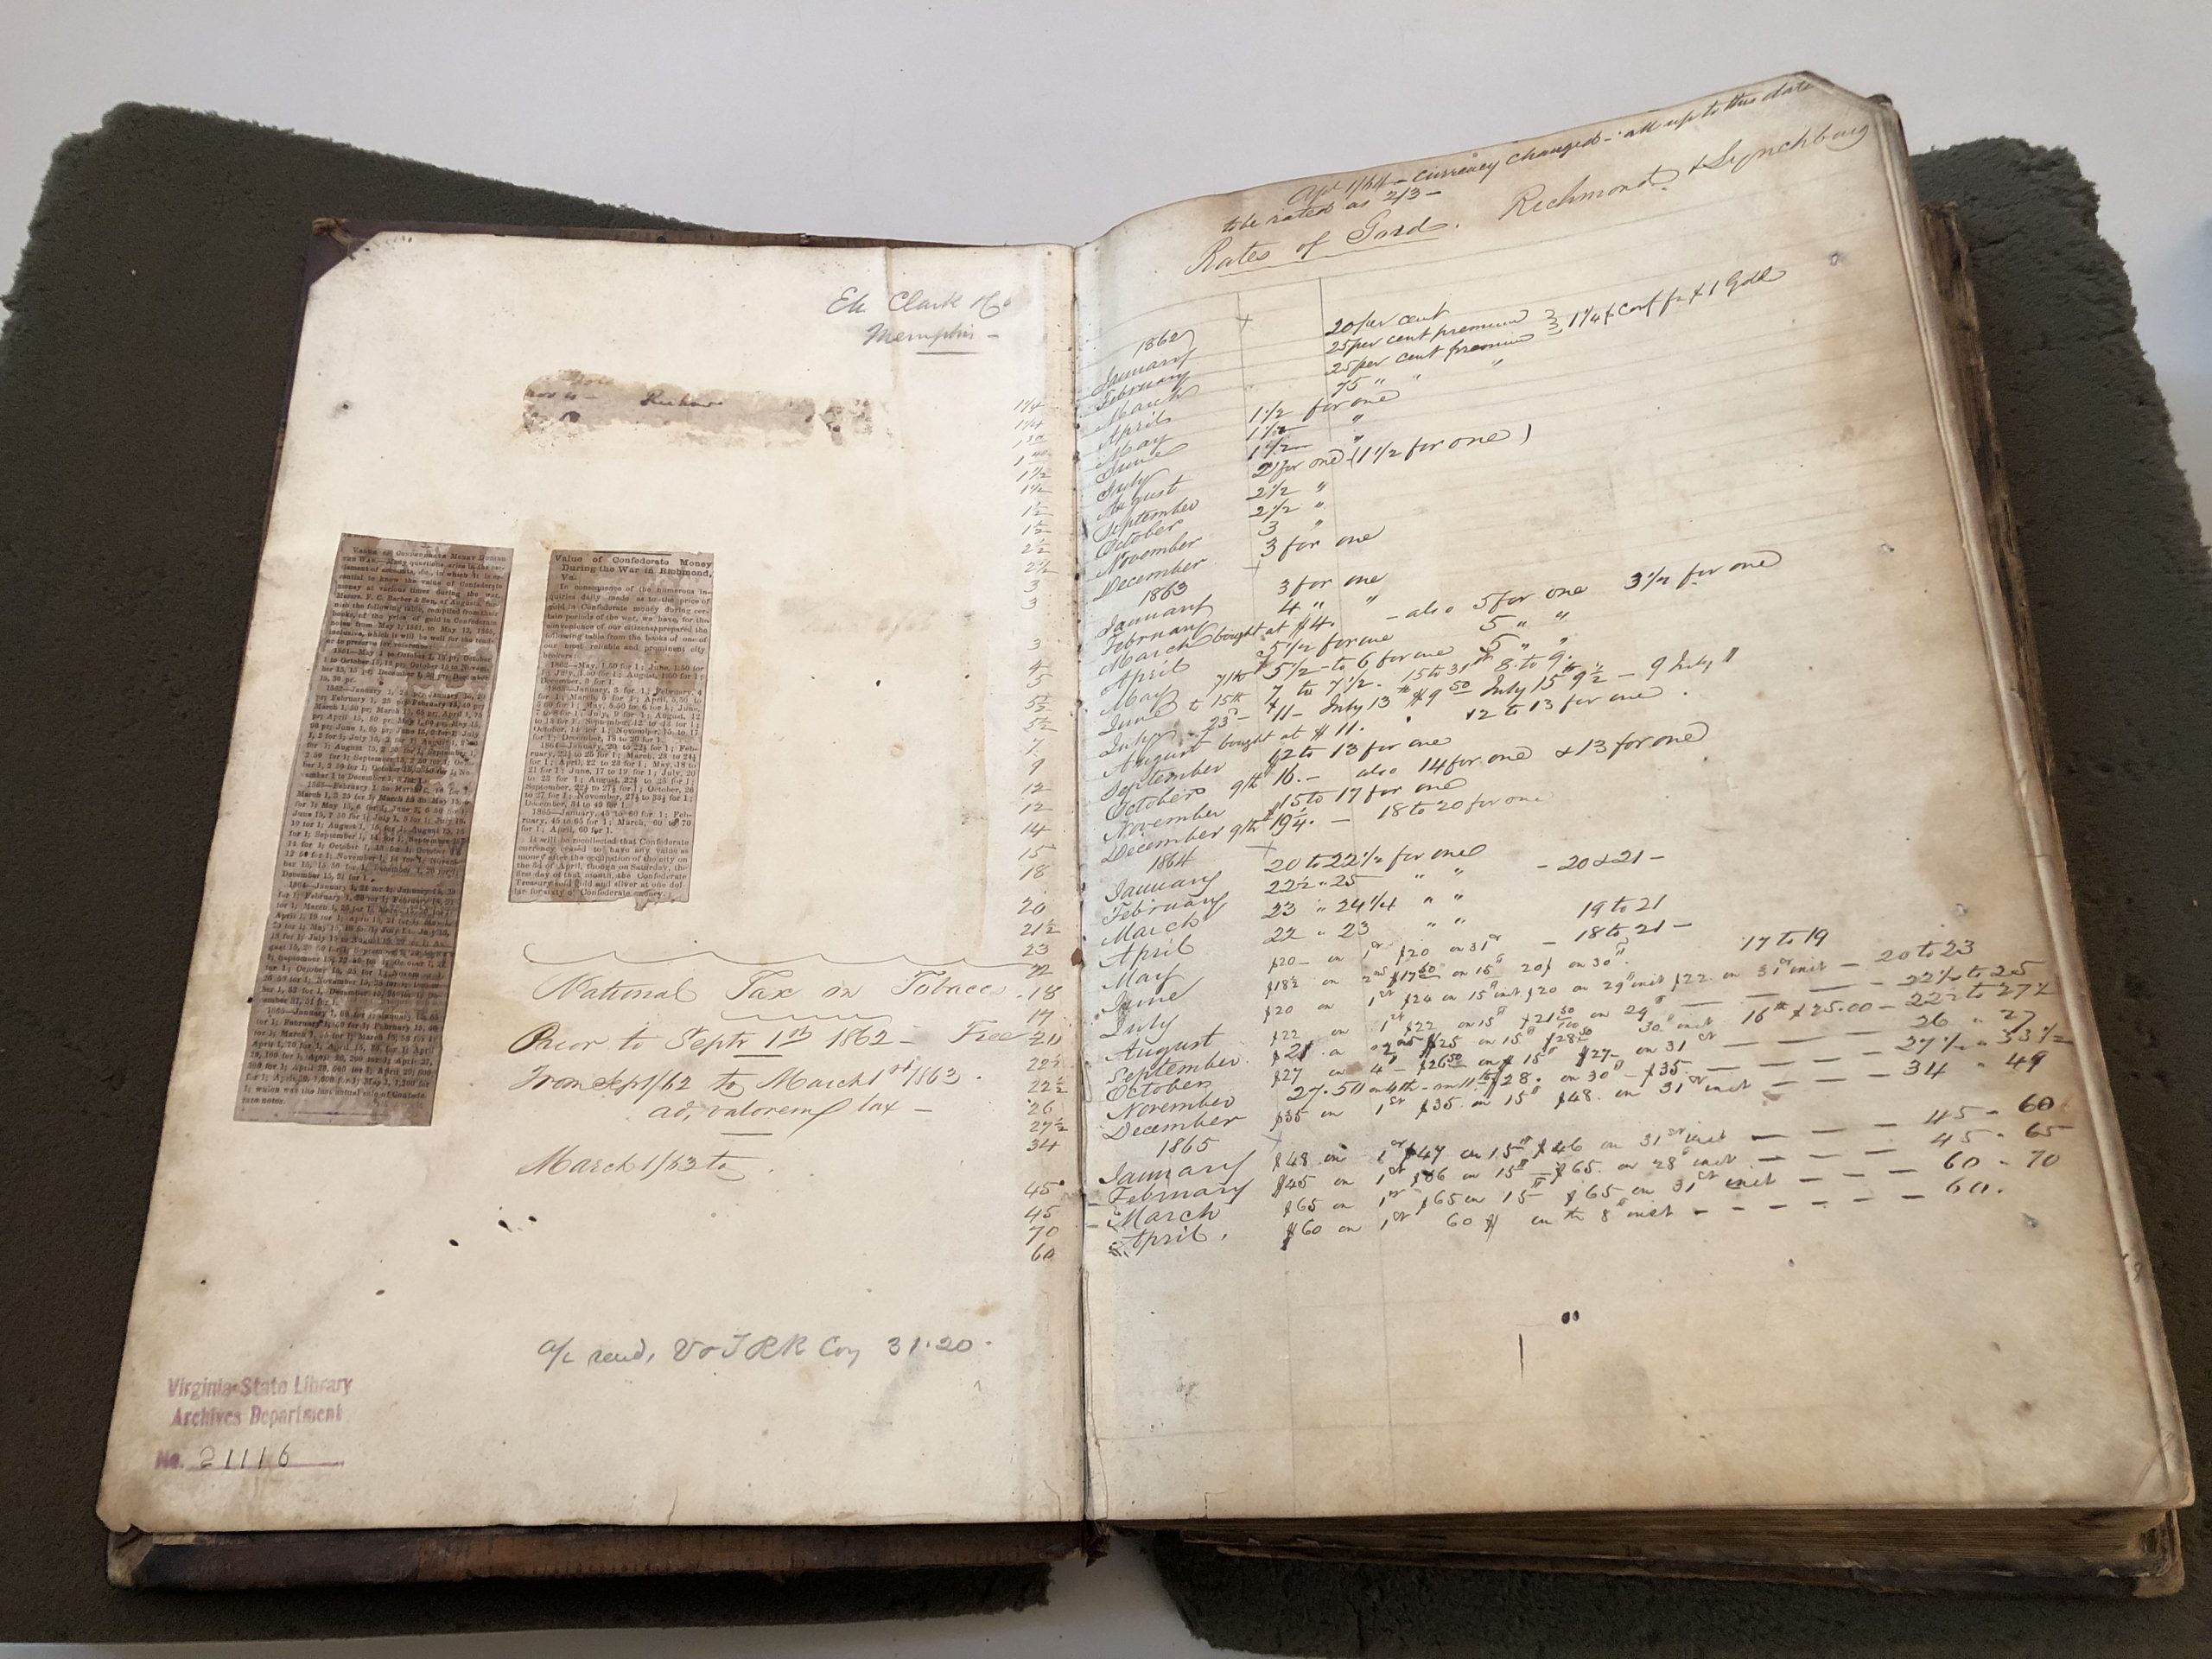 Identifying a Ledger: A Noteworthy Business Record at the Library of Virginia